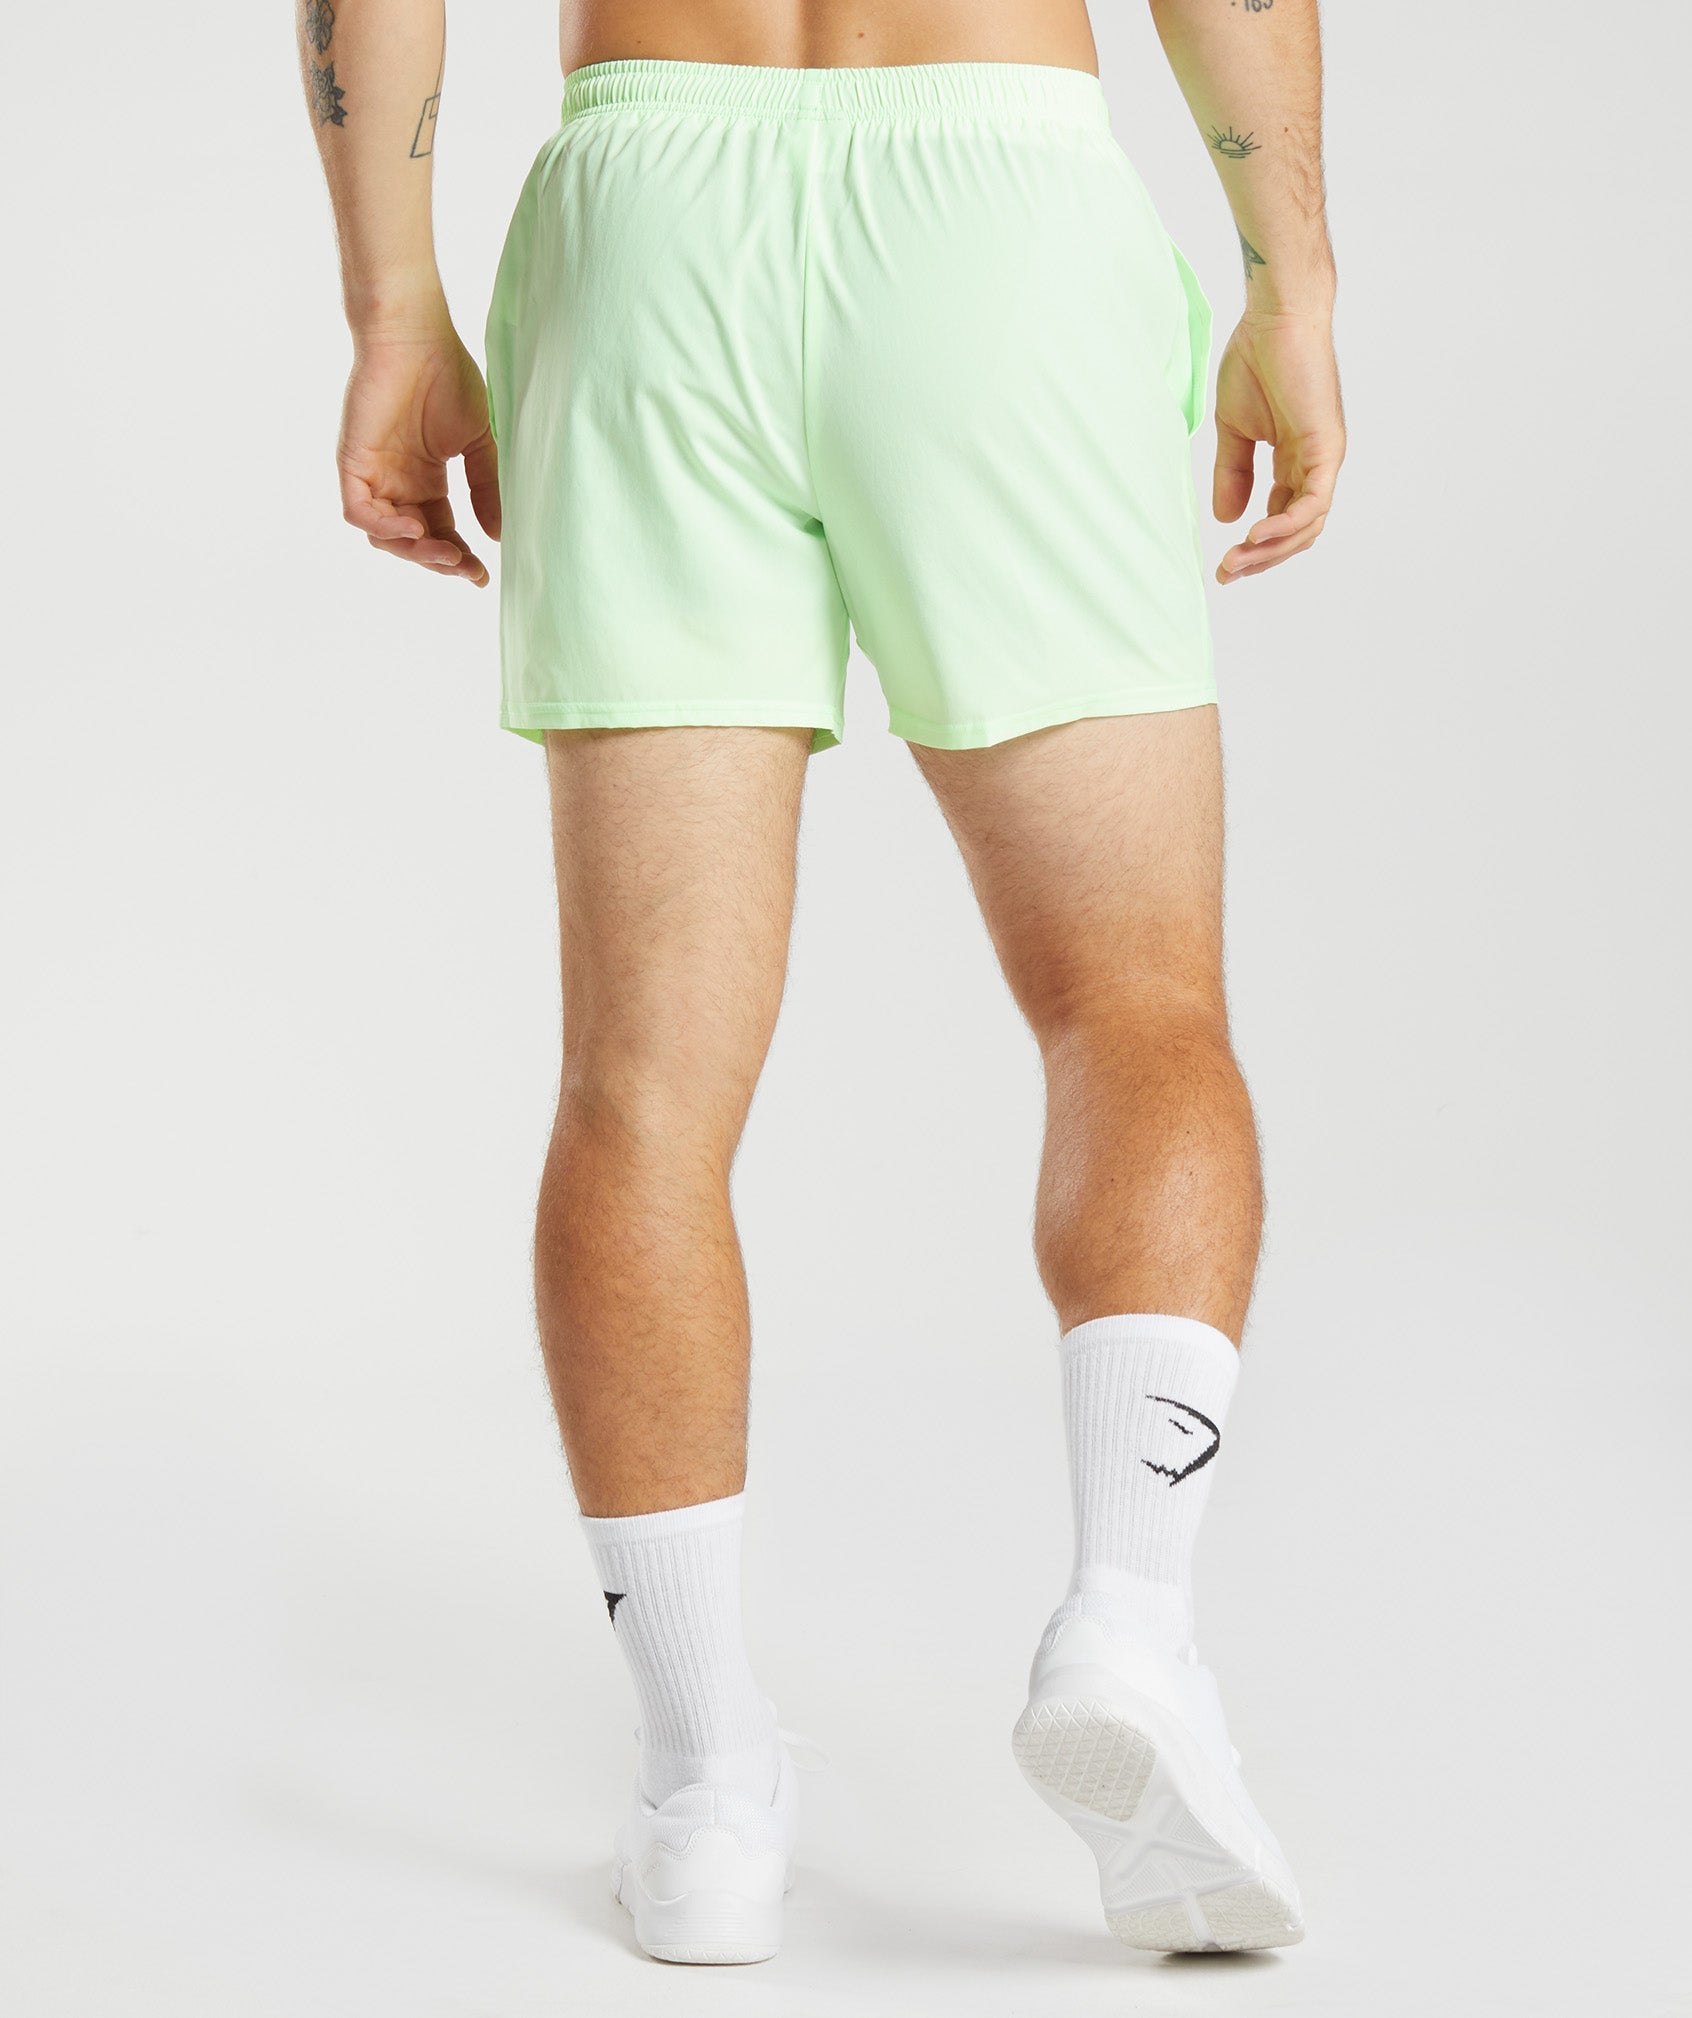 Arrival 5" Shorts in Fluo Mint